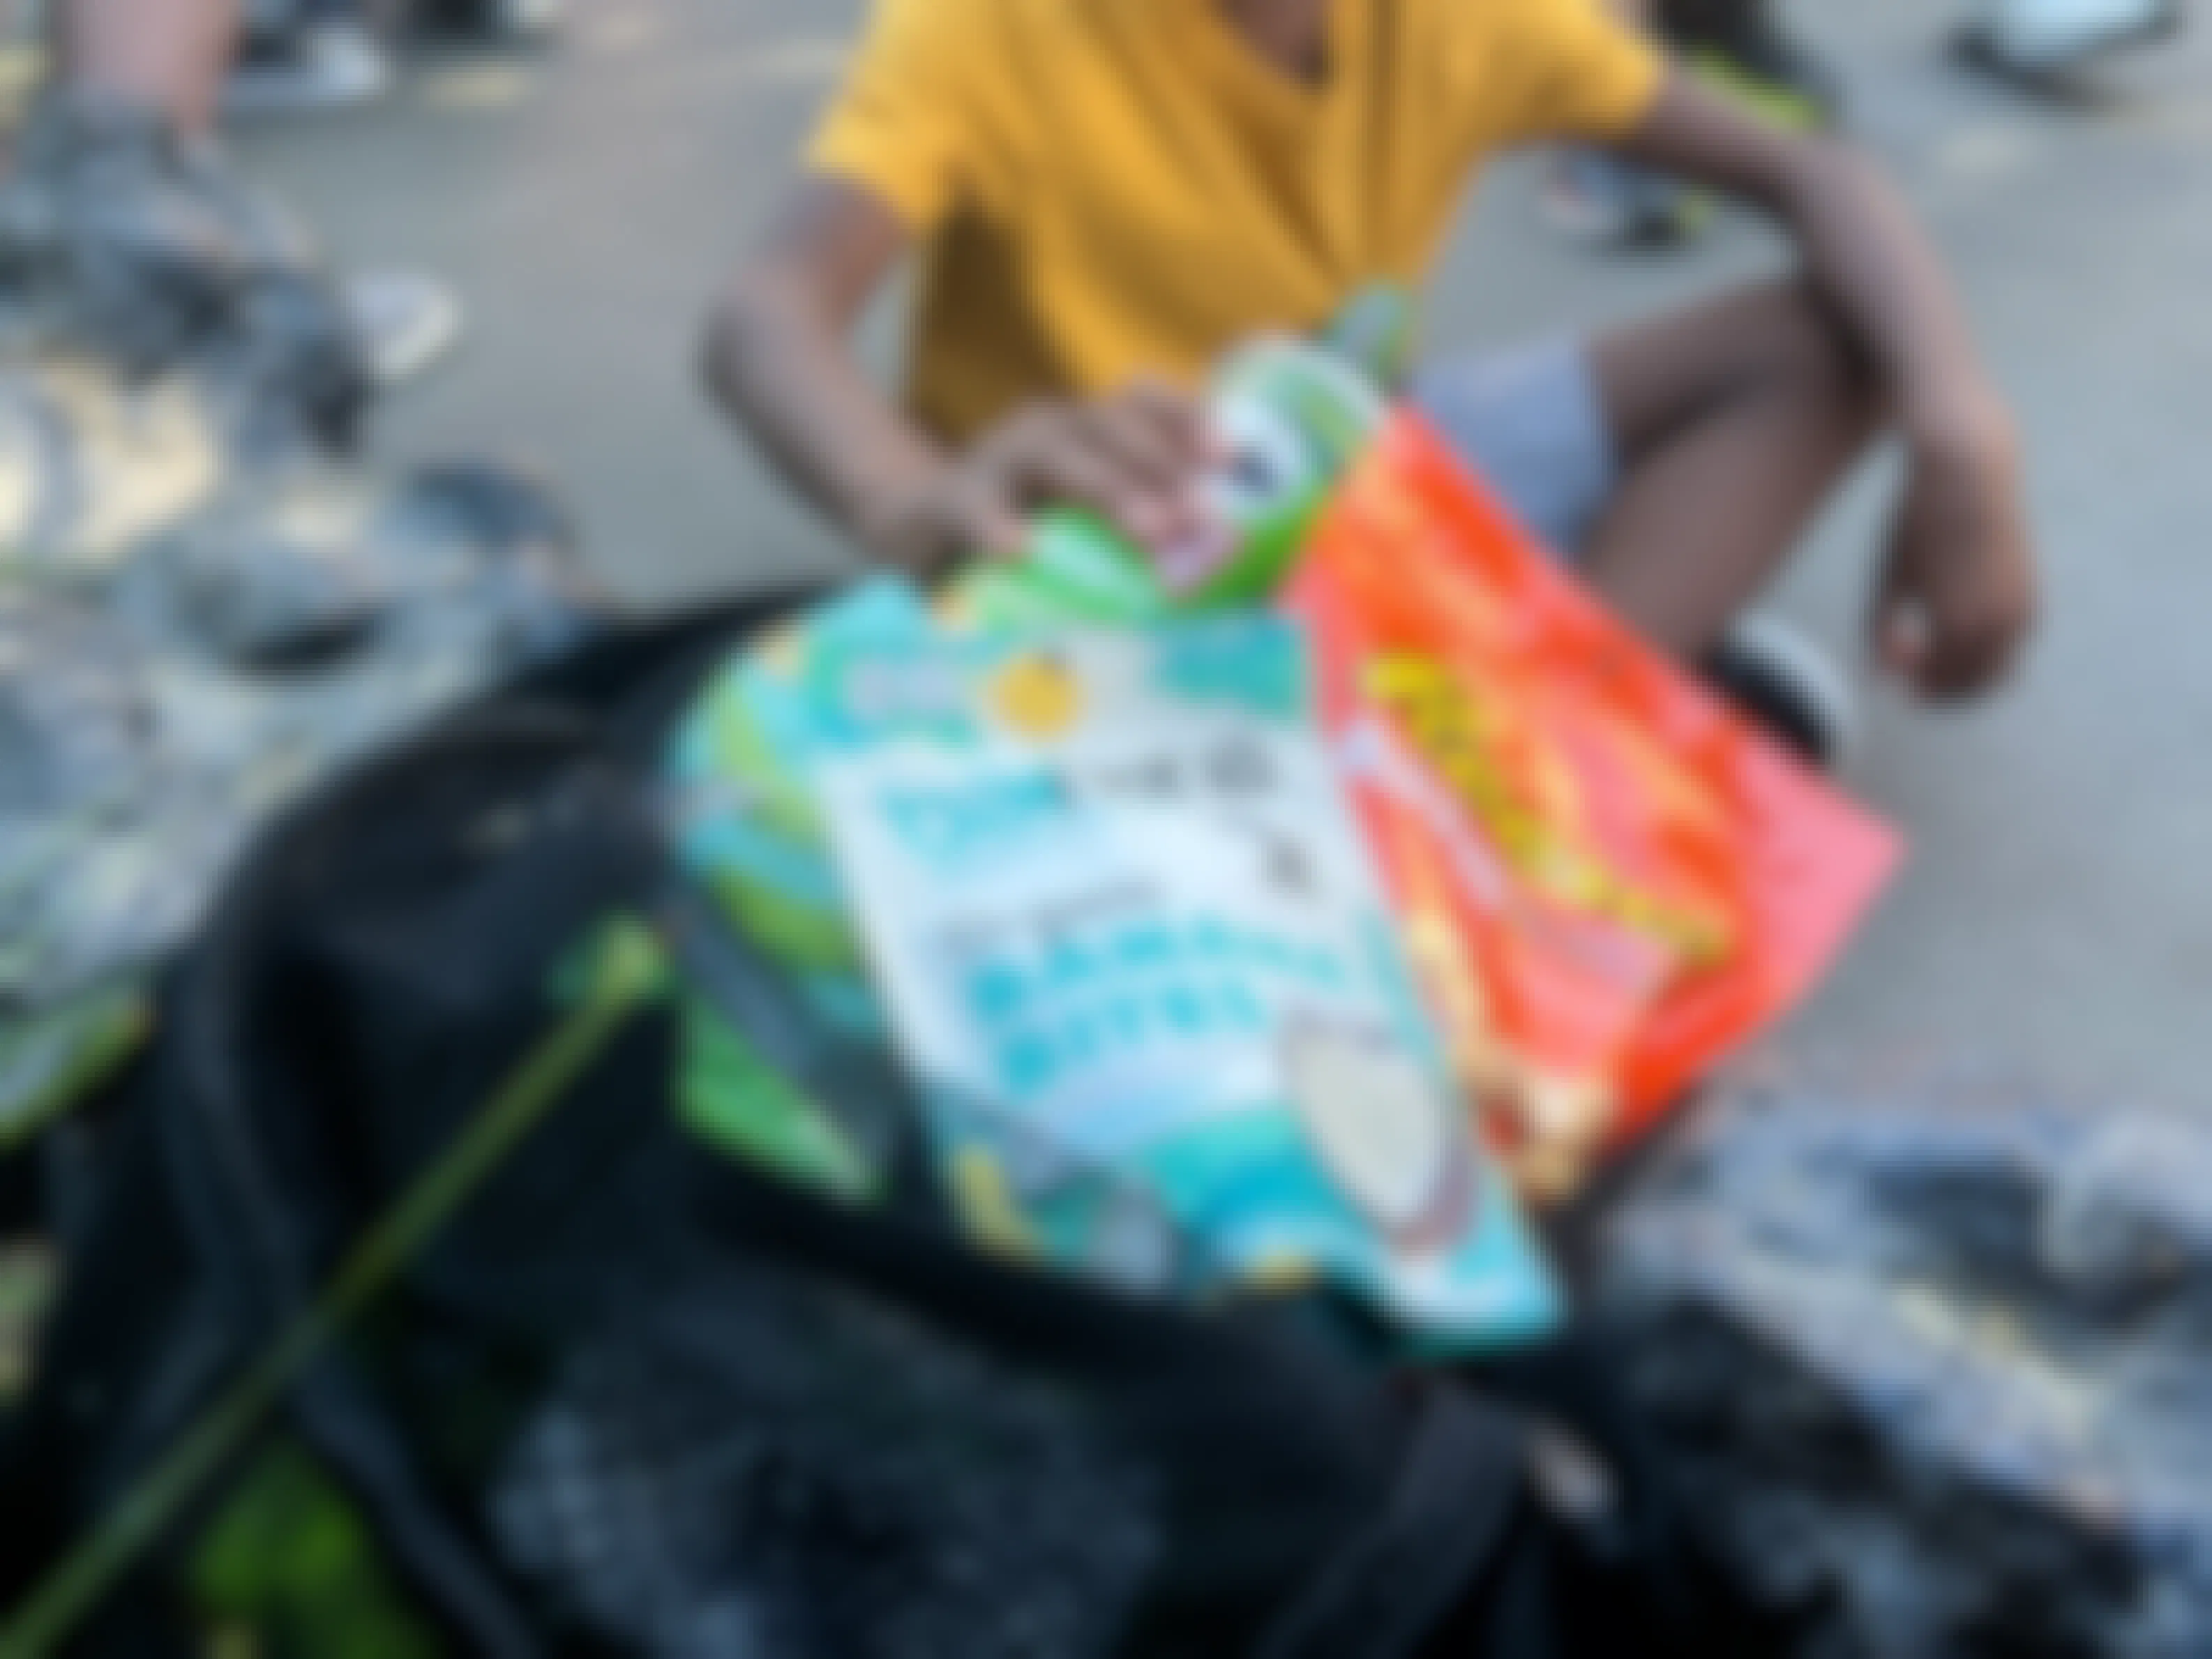 A young boy grabbing snacks out of a bag brought into a theme park